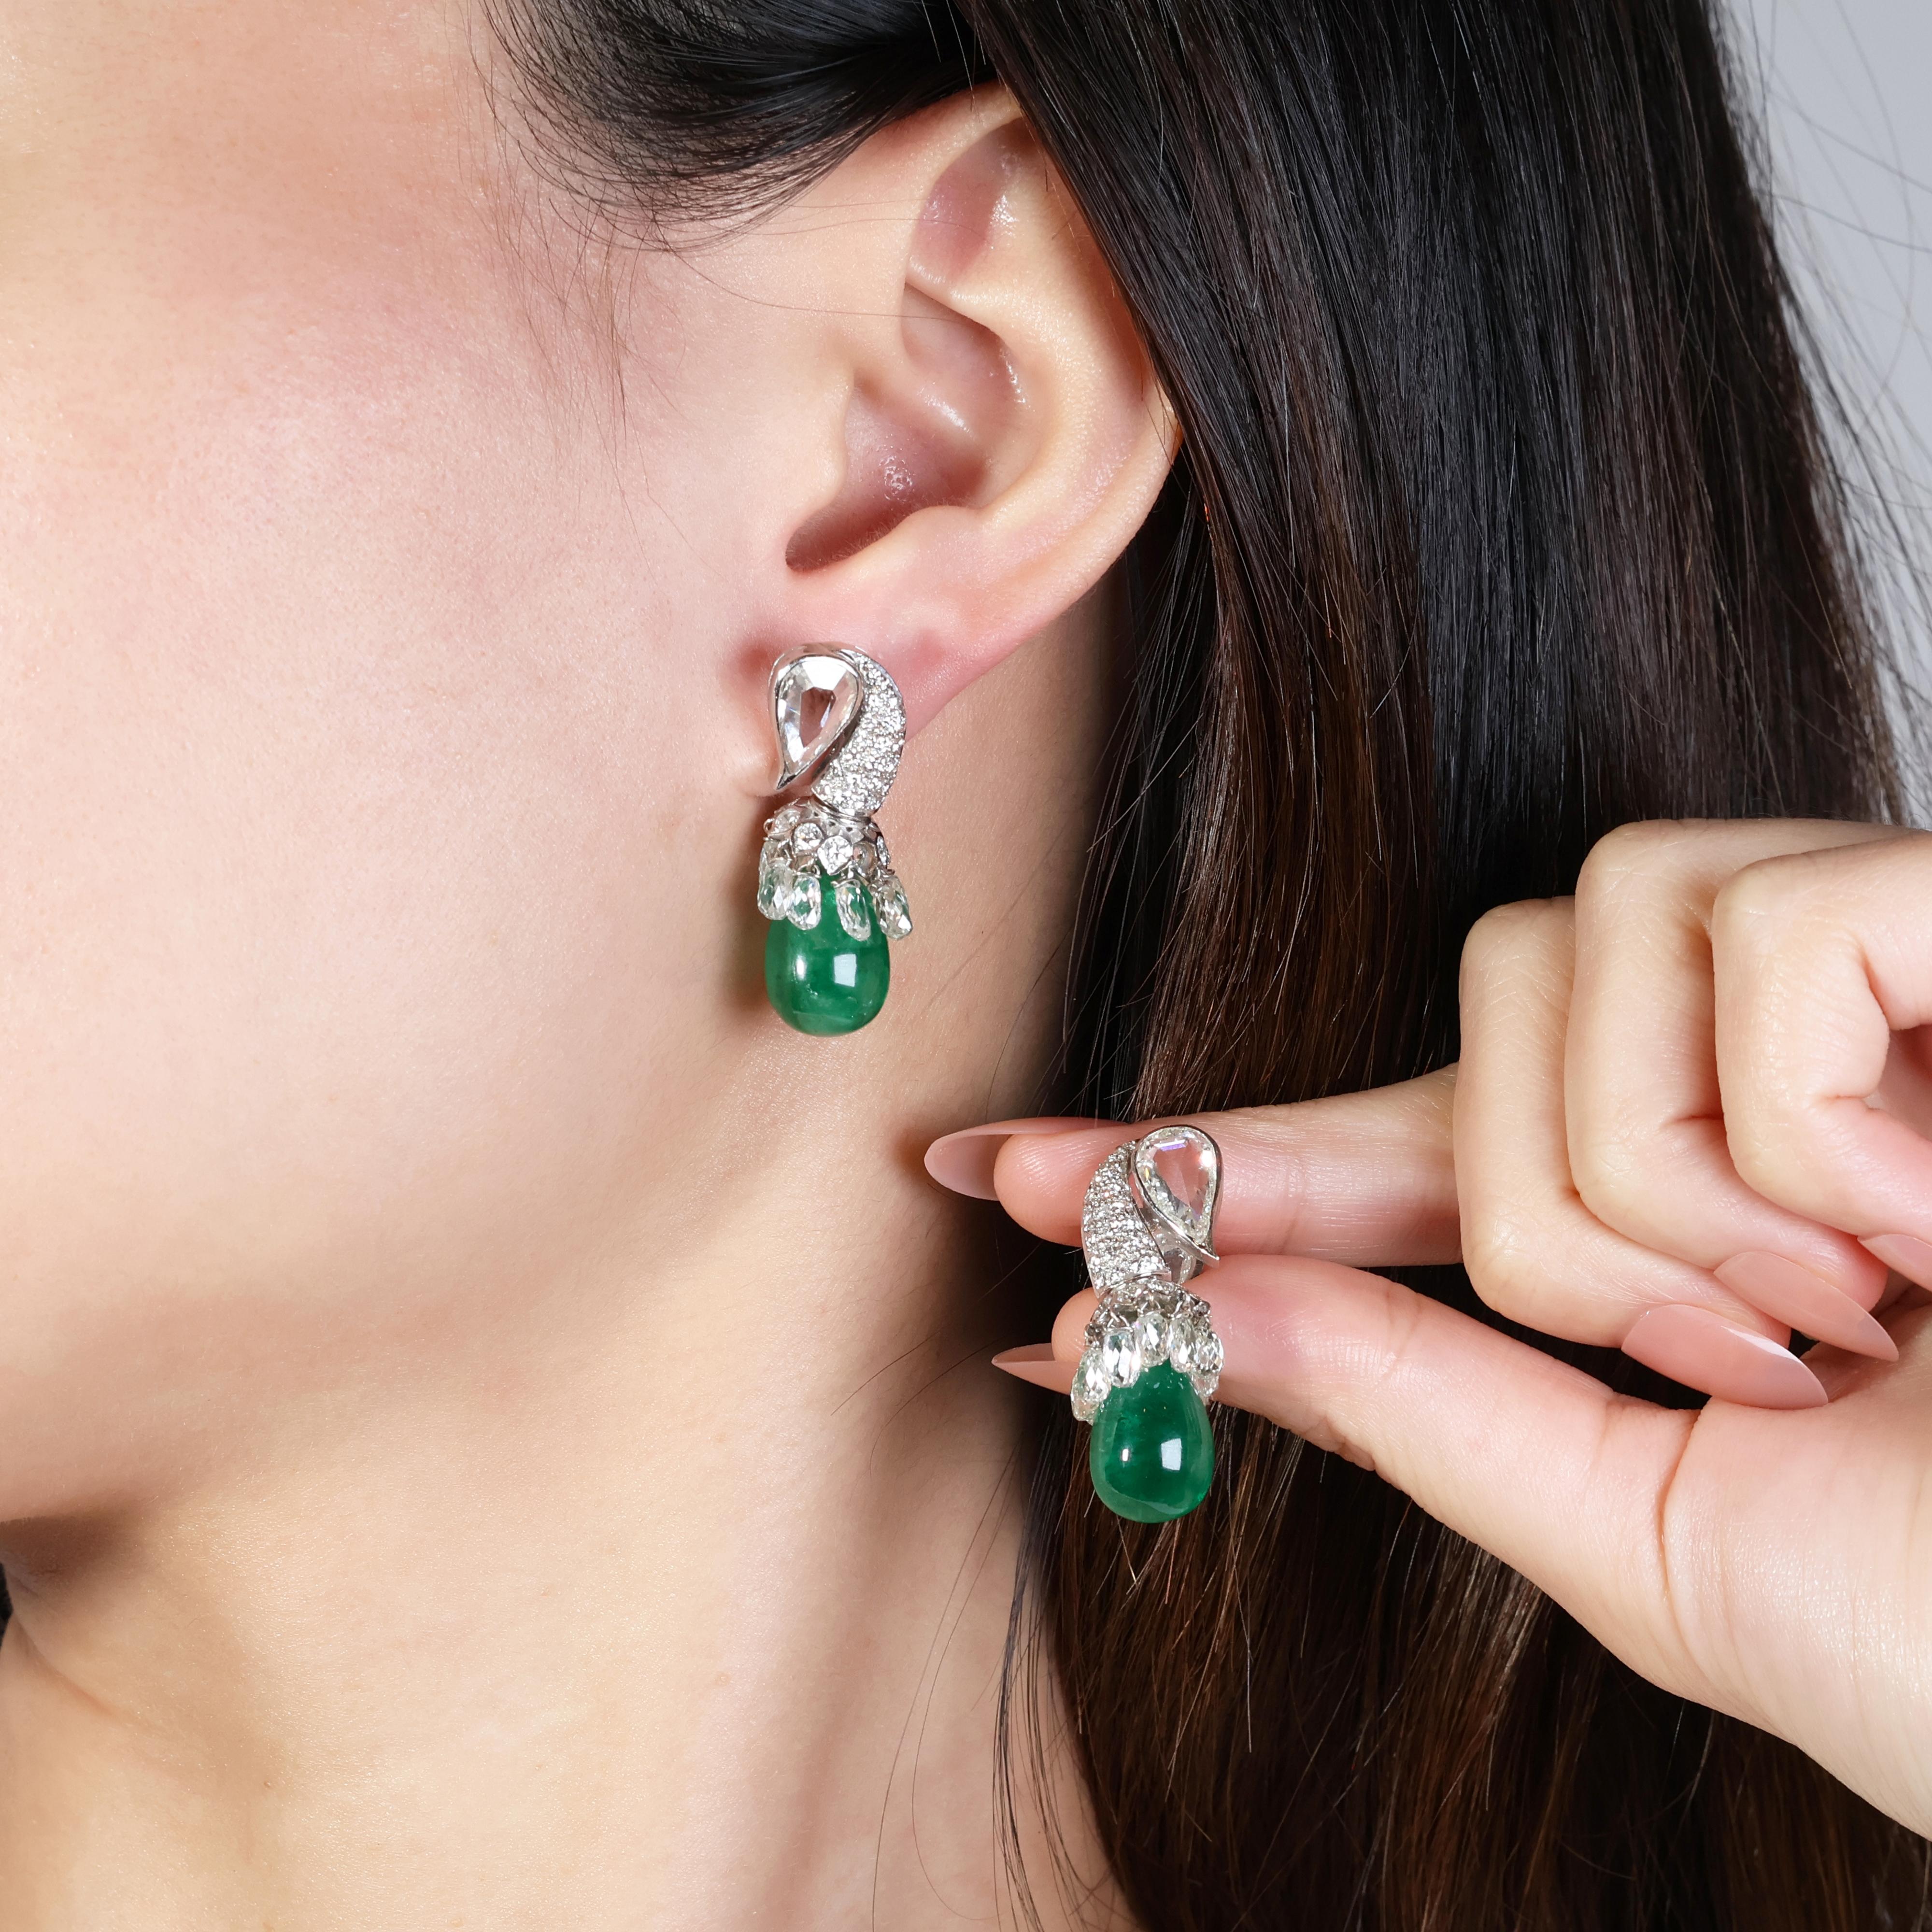 Gorgeous 24.31ct Green Emerald Teardrop Earrings with Diamonds in 18K White Gold For Sale 4